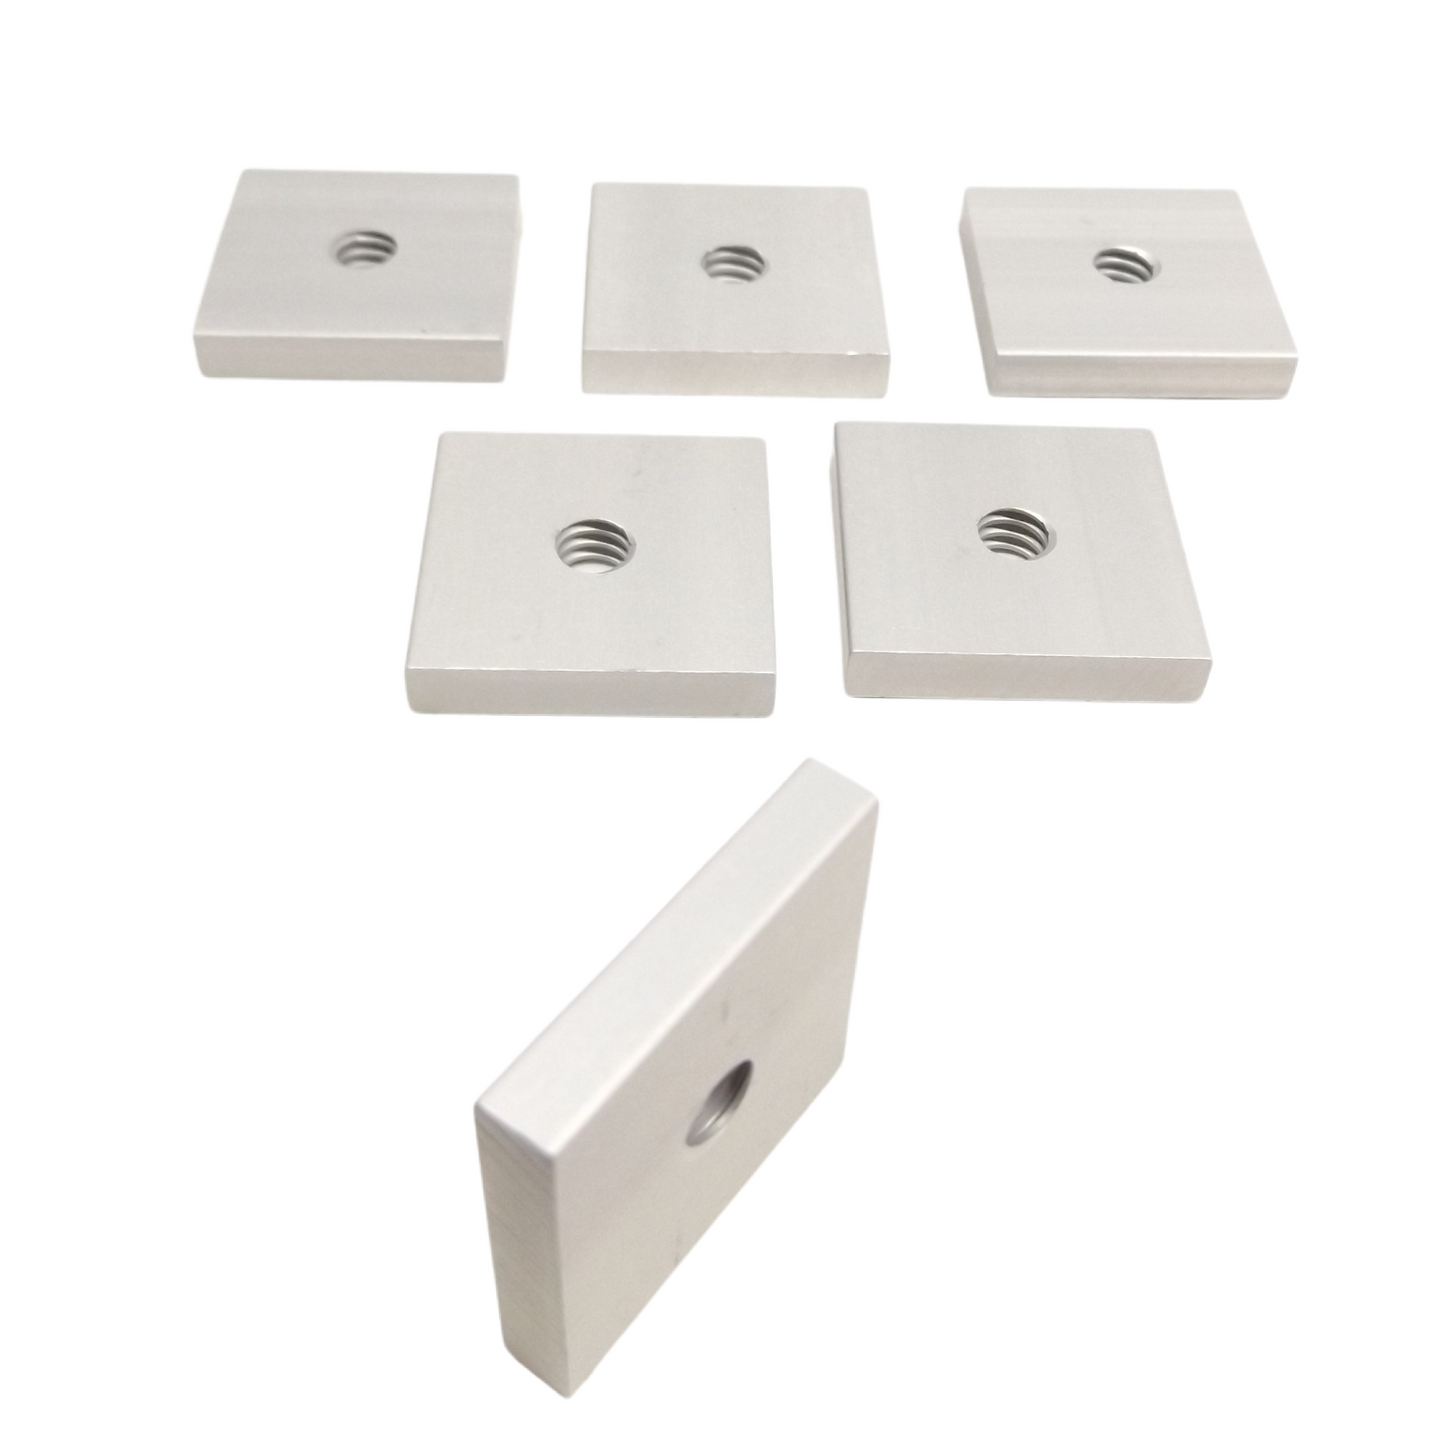 6-PACK  80/20 INC. 2492 25-2492 10 SERIES NARROW 1 INCH BACKING PLATE